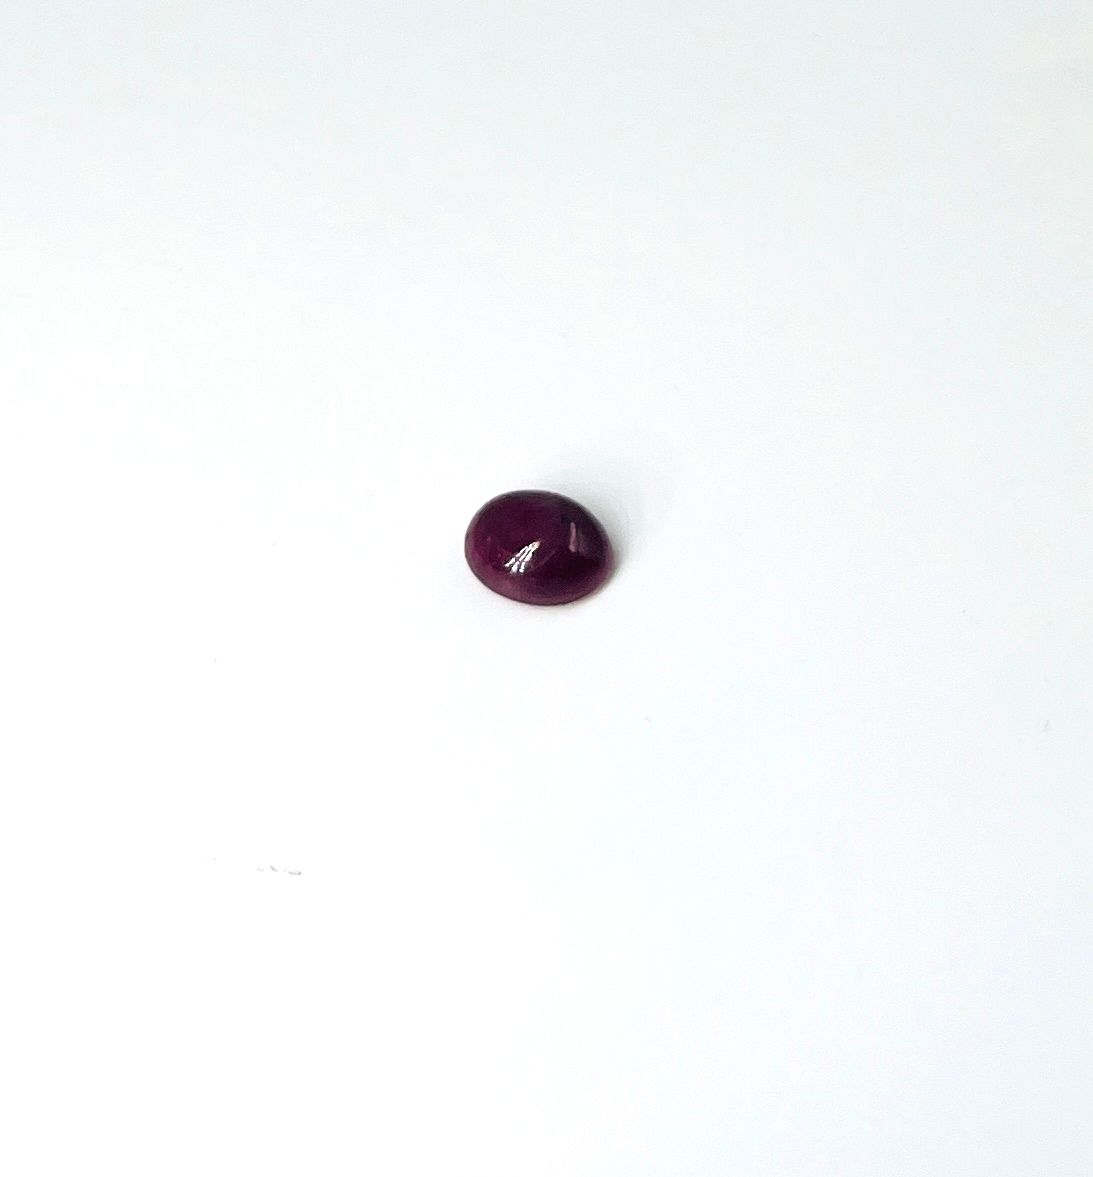 Null Ruby cabochon weighing 3.10 carats. With its ITLGR certificate.